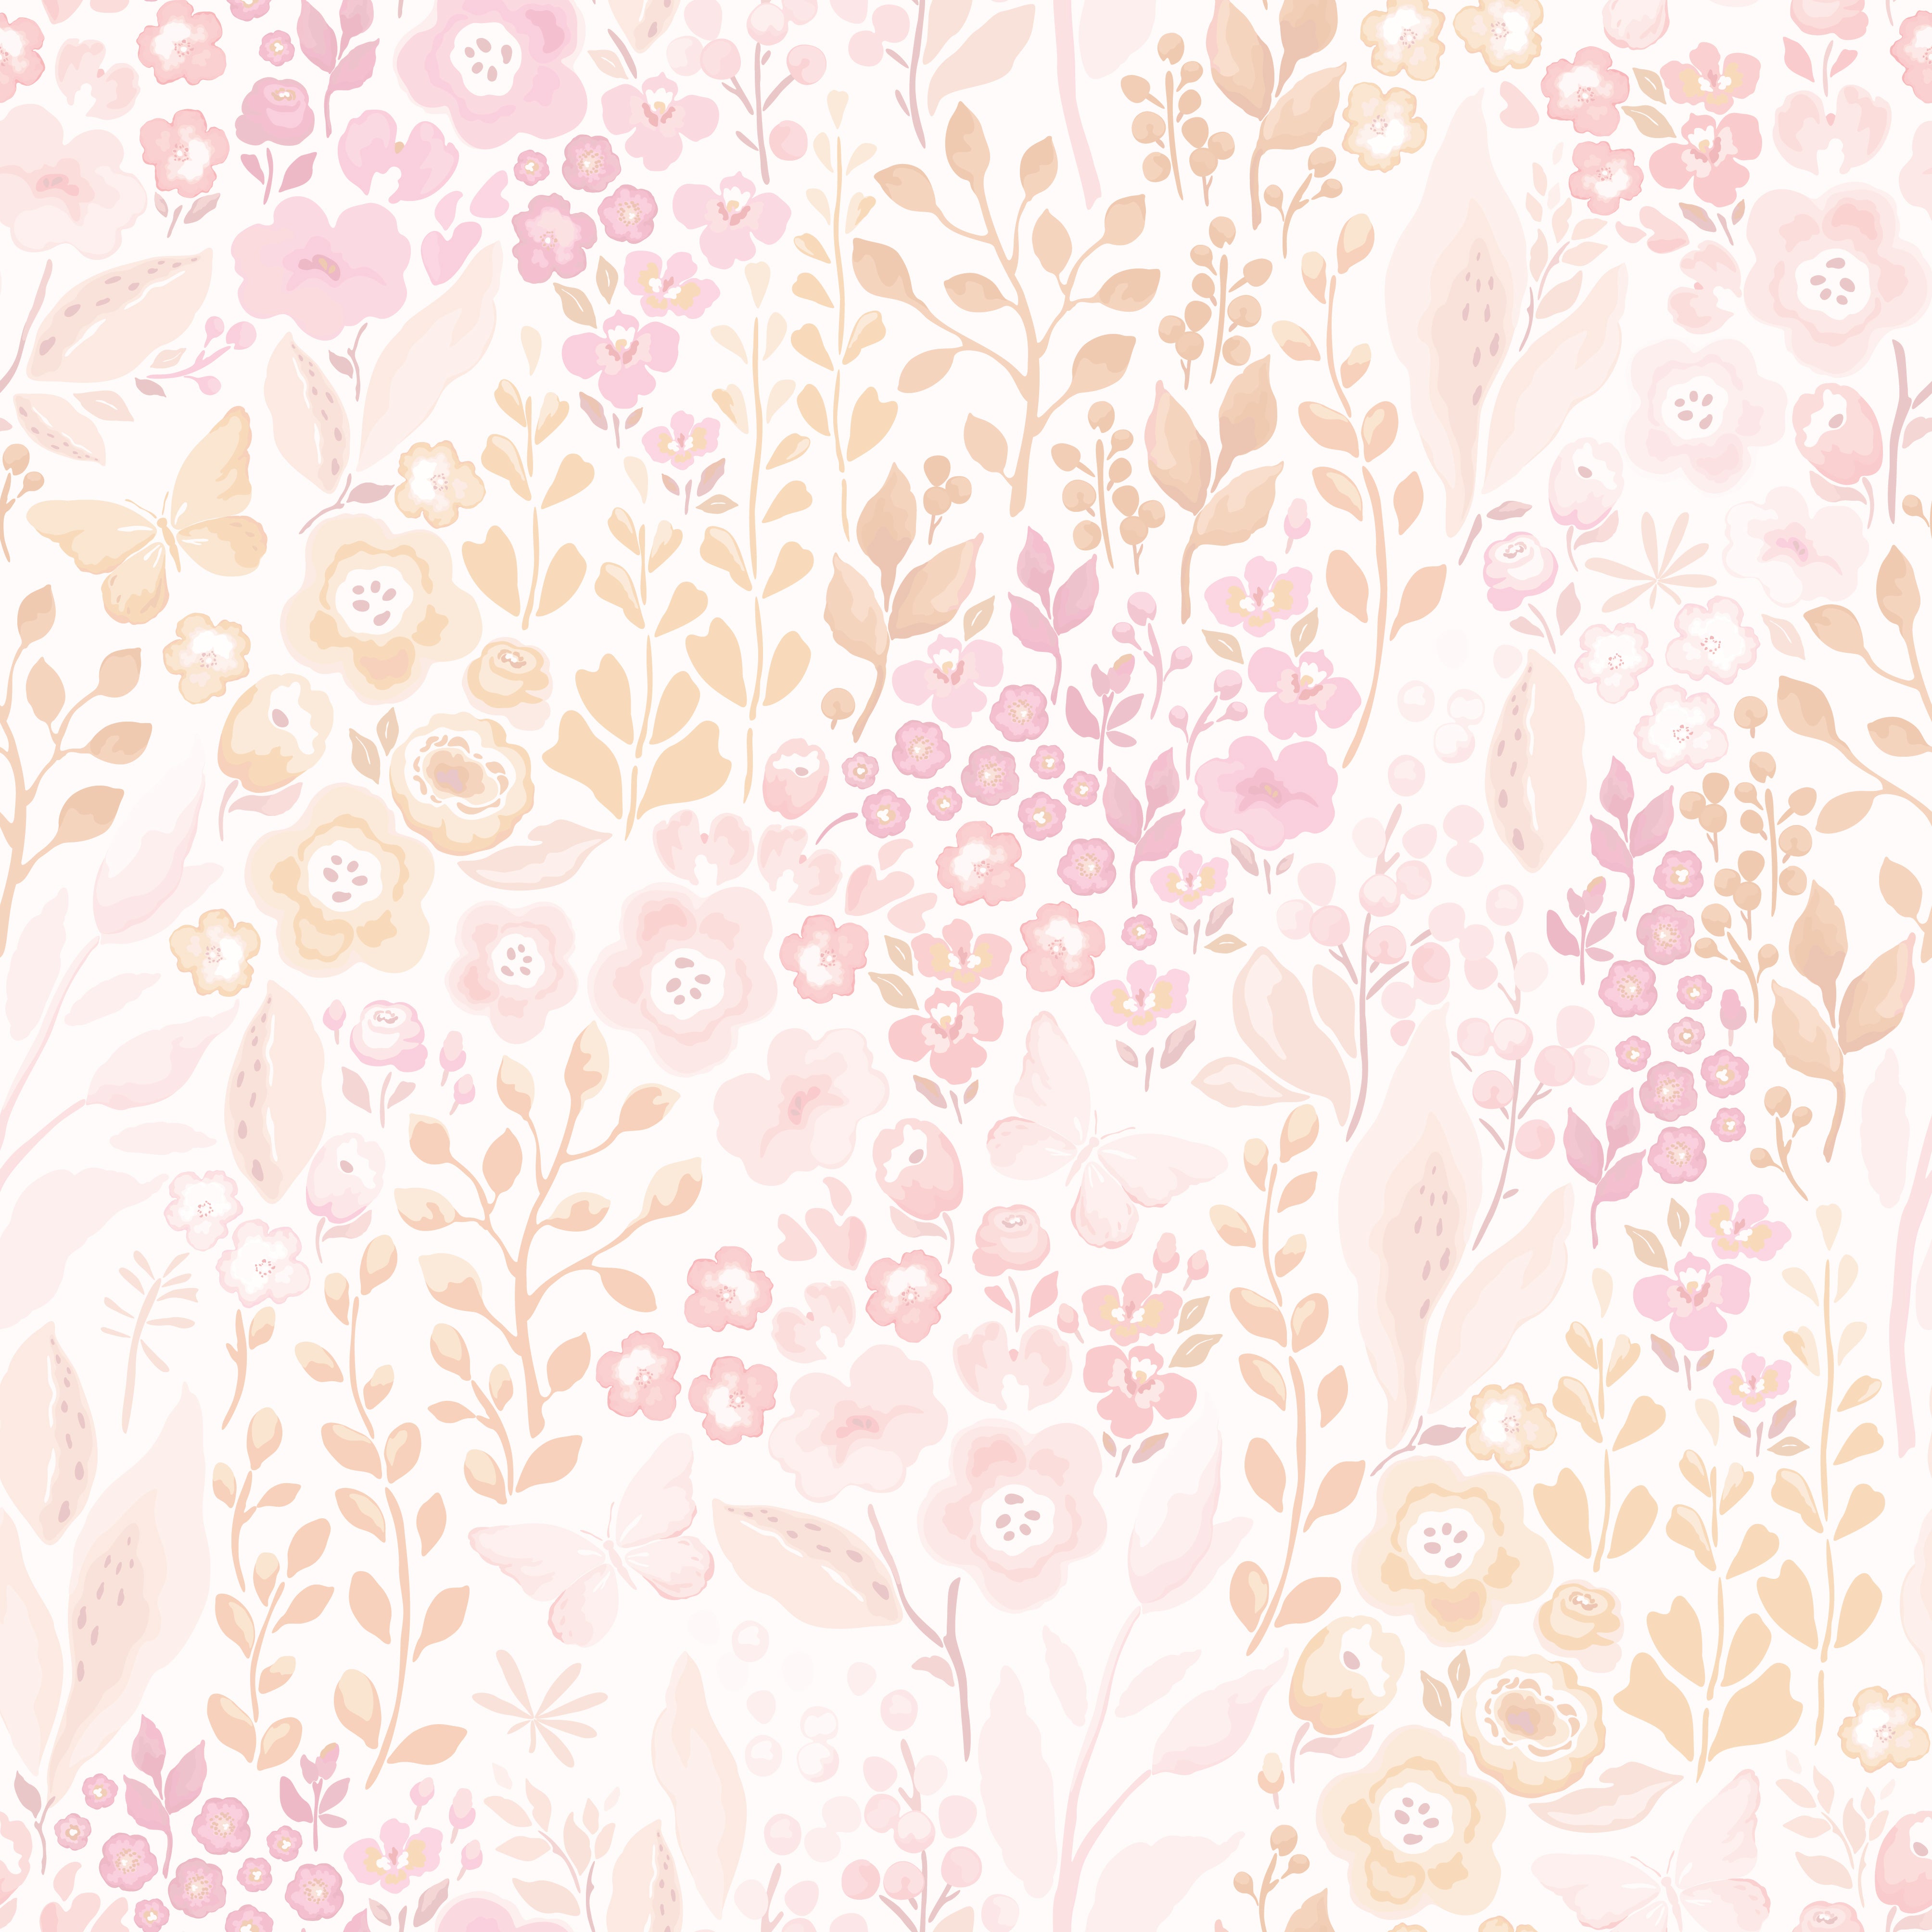 a close-up view of the "Pretty Petals Wallpaper - 12.5"," showing a detailed pattern of flowers, leaves, and butterflies in pastel pink, soft beige, and white hues. The design suggests a gentle, joyful spring meadow, perfect for adding a touch of nature's whimsy to any space.